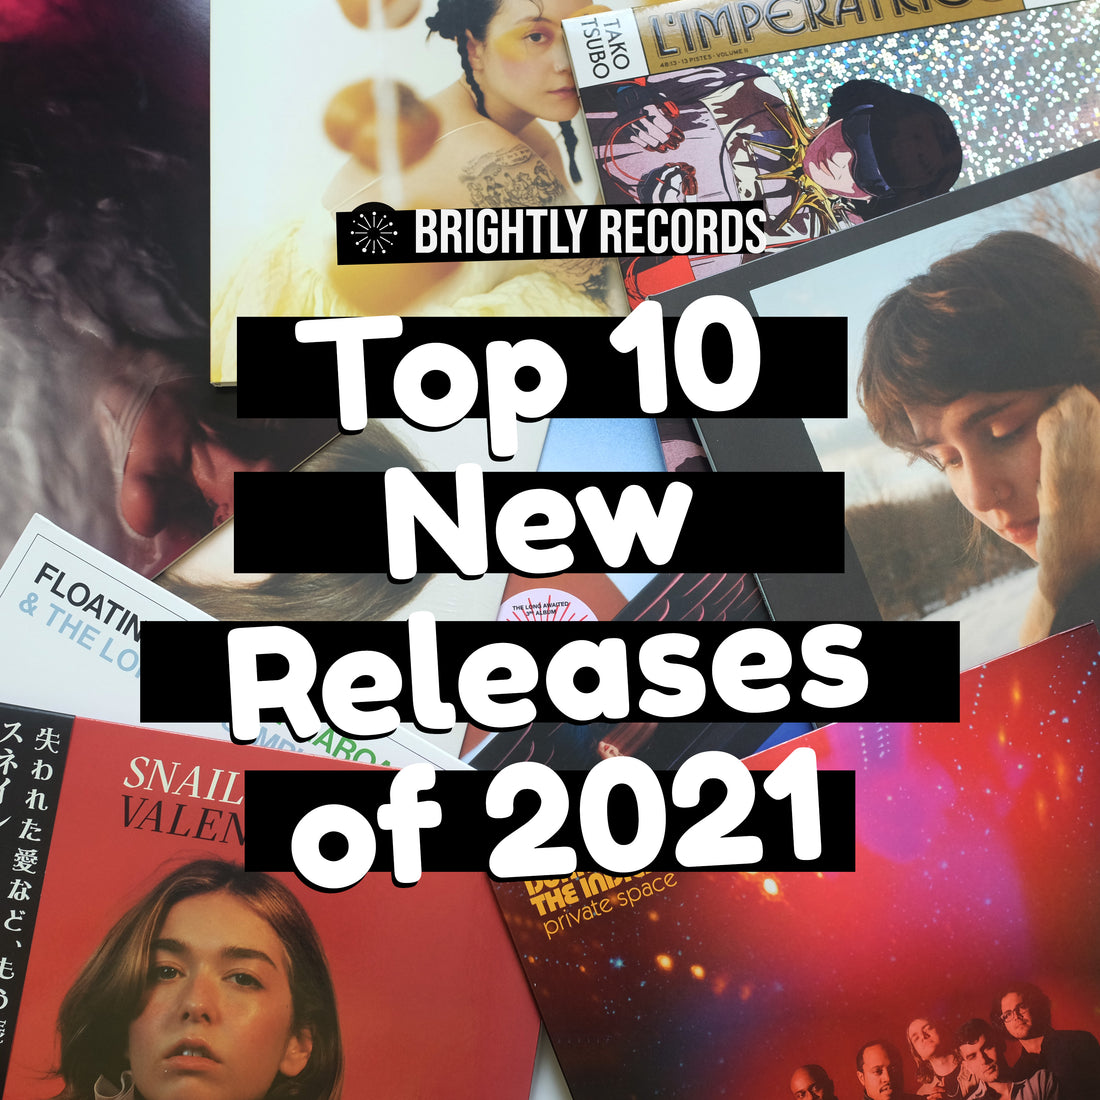 Brightly Records Top 10 New Releases of 2021